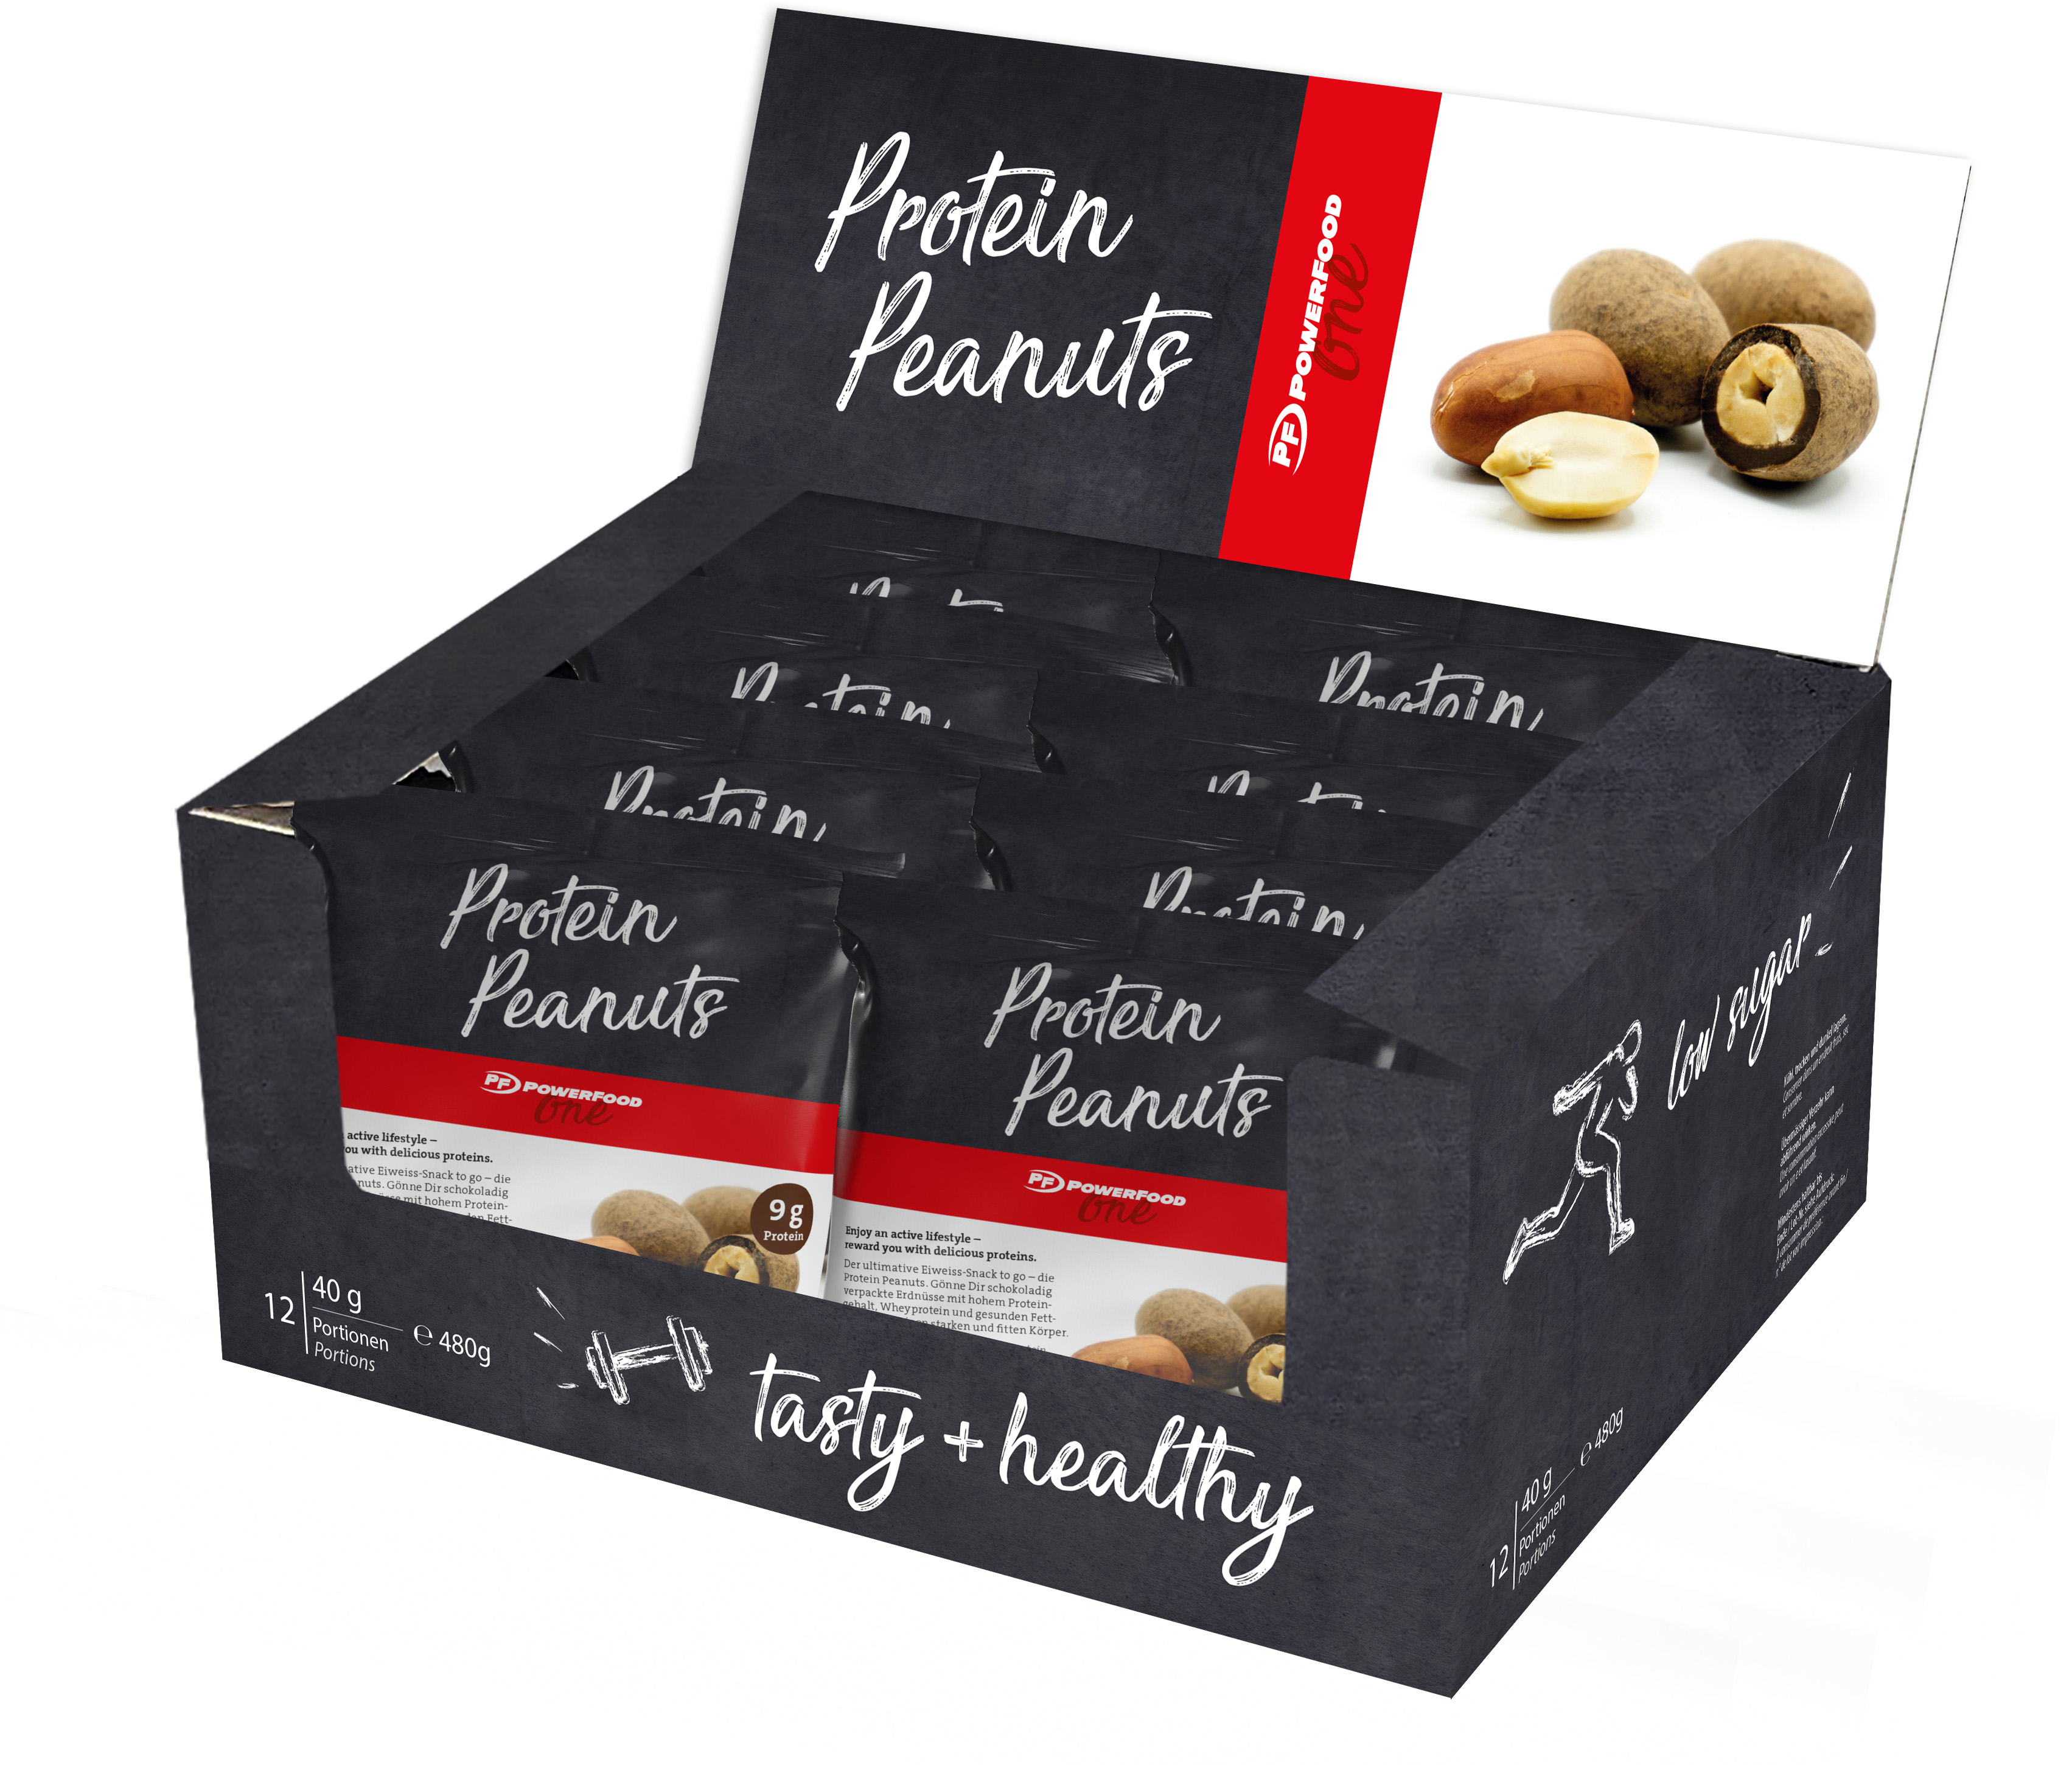 PowerFood One Protein Peanuts (12 x 40g)